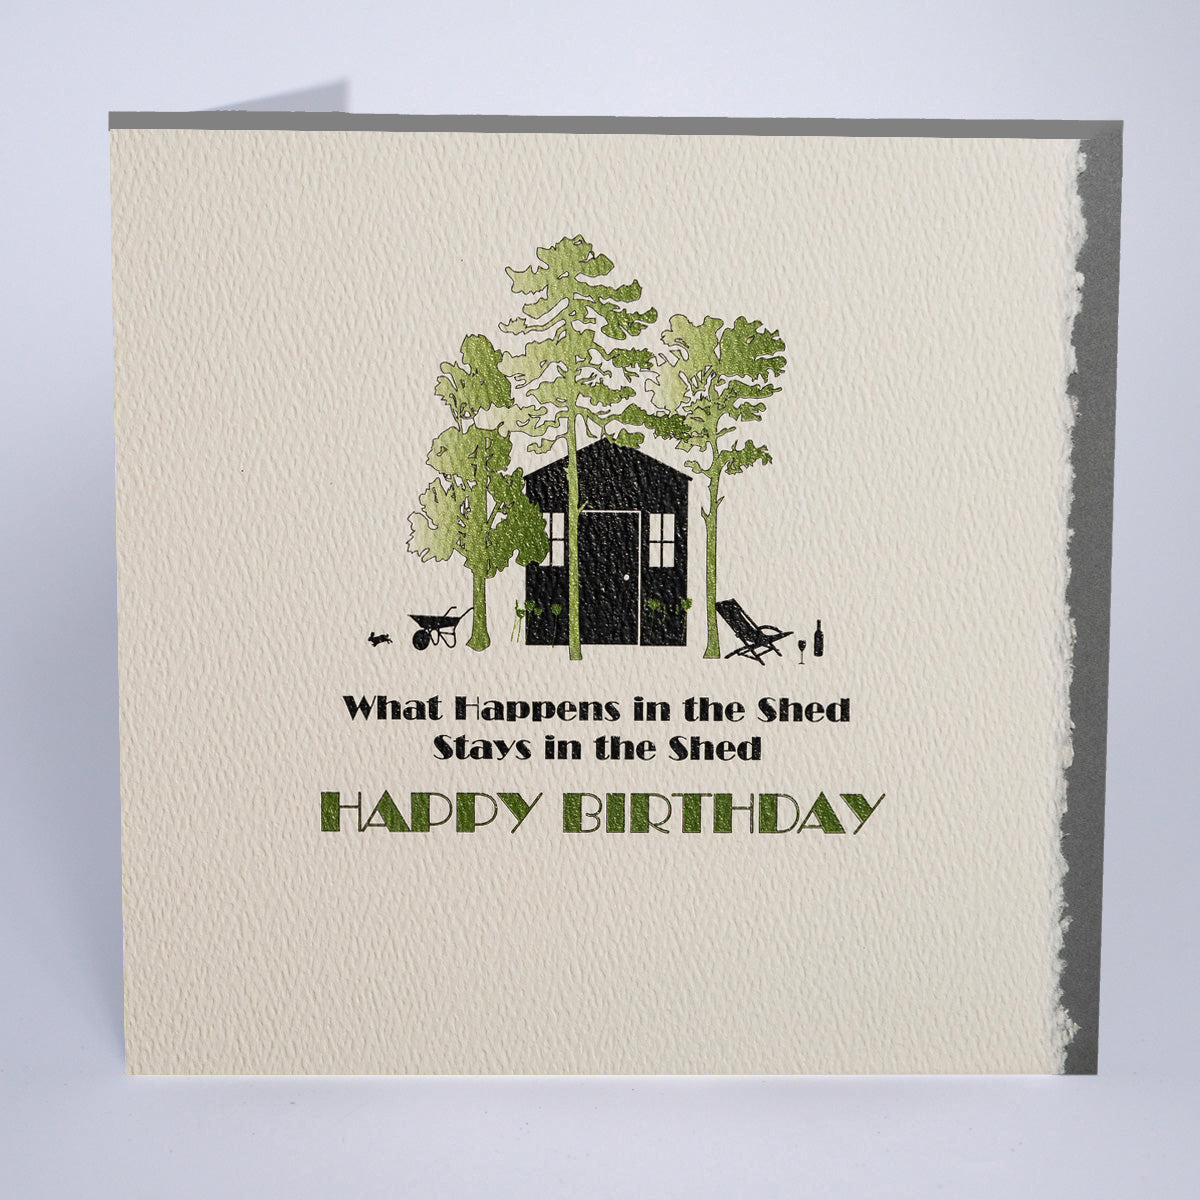 What happens in the shed…Happy Birthday